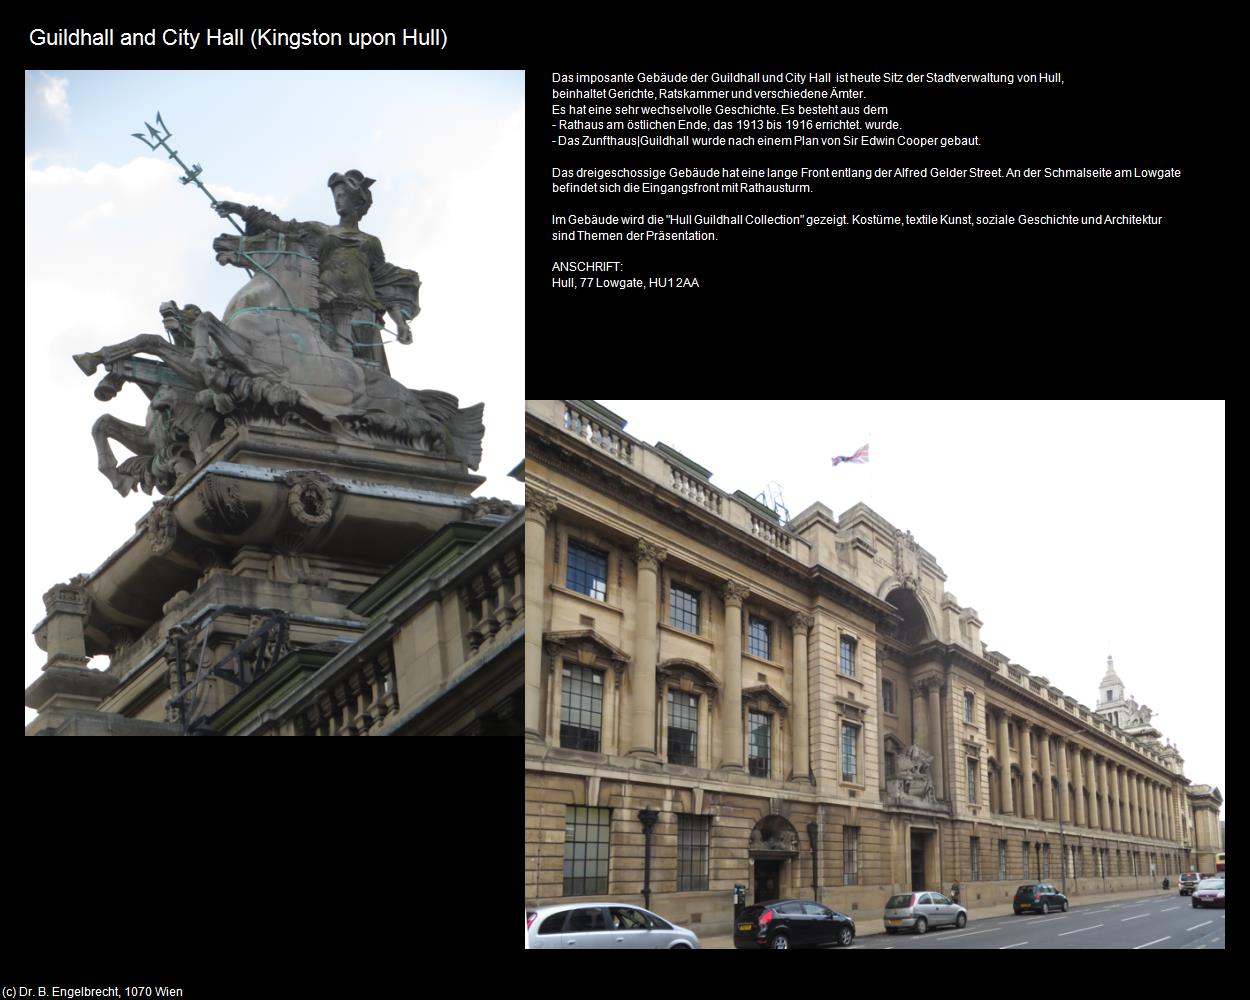 Guildhall and City Hall  (Kingston upon Hull, England) in Kulturatlas-ENGLAND und WALES